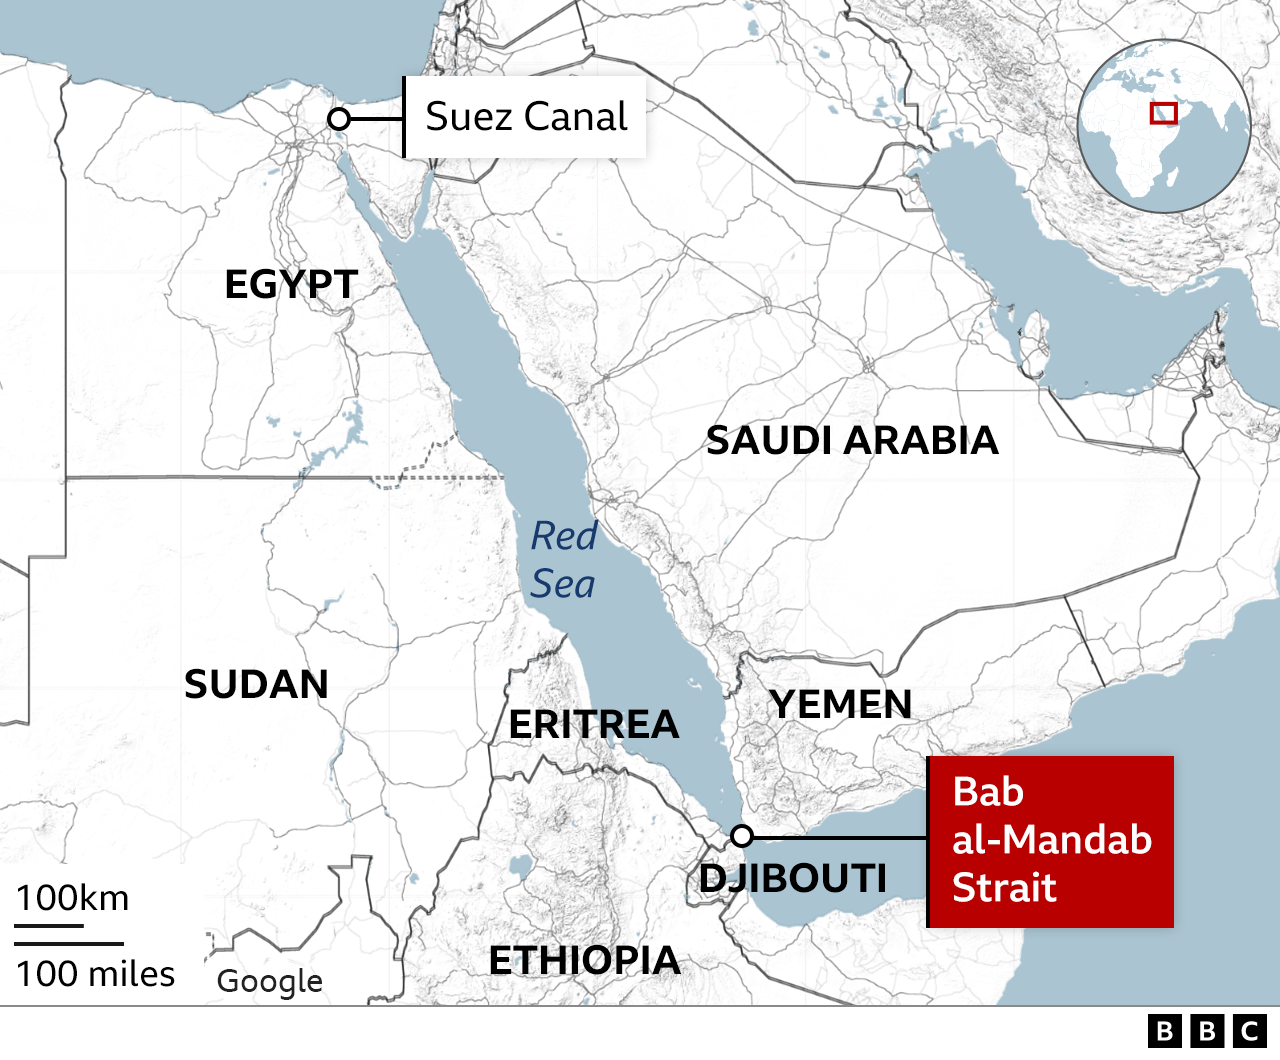 A map showing the Bab al-Mandab strait, which sits between Yemen on the Arabian Peninsula and Djibouti and Eritrea on the African coast.